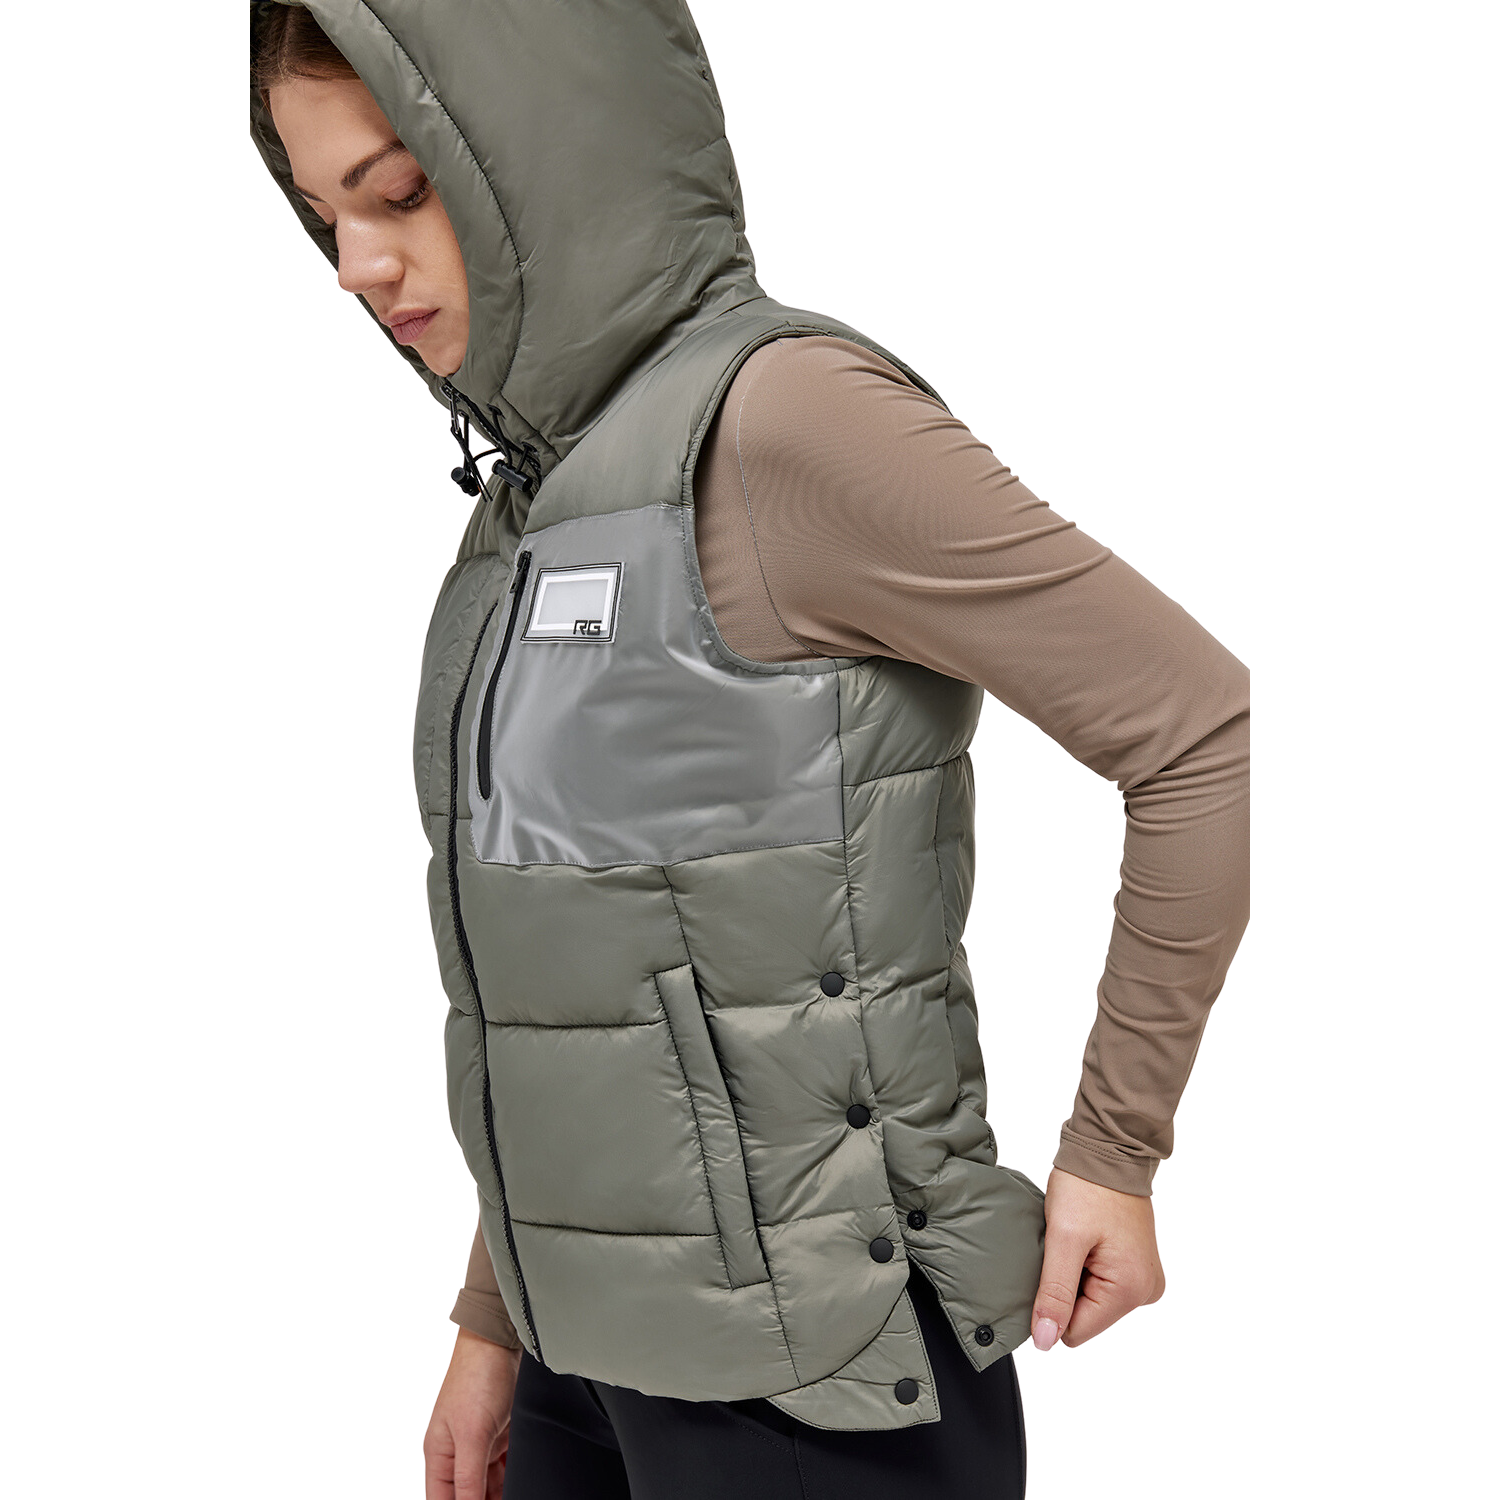 Ladies RG Quilted Hooded Puffer Vest - Khaki